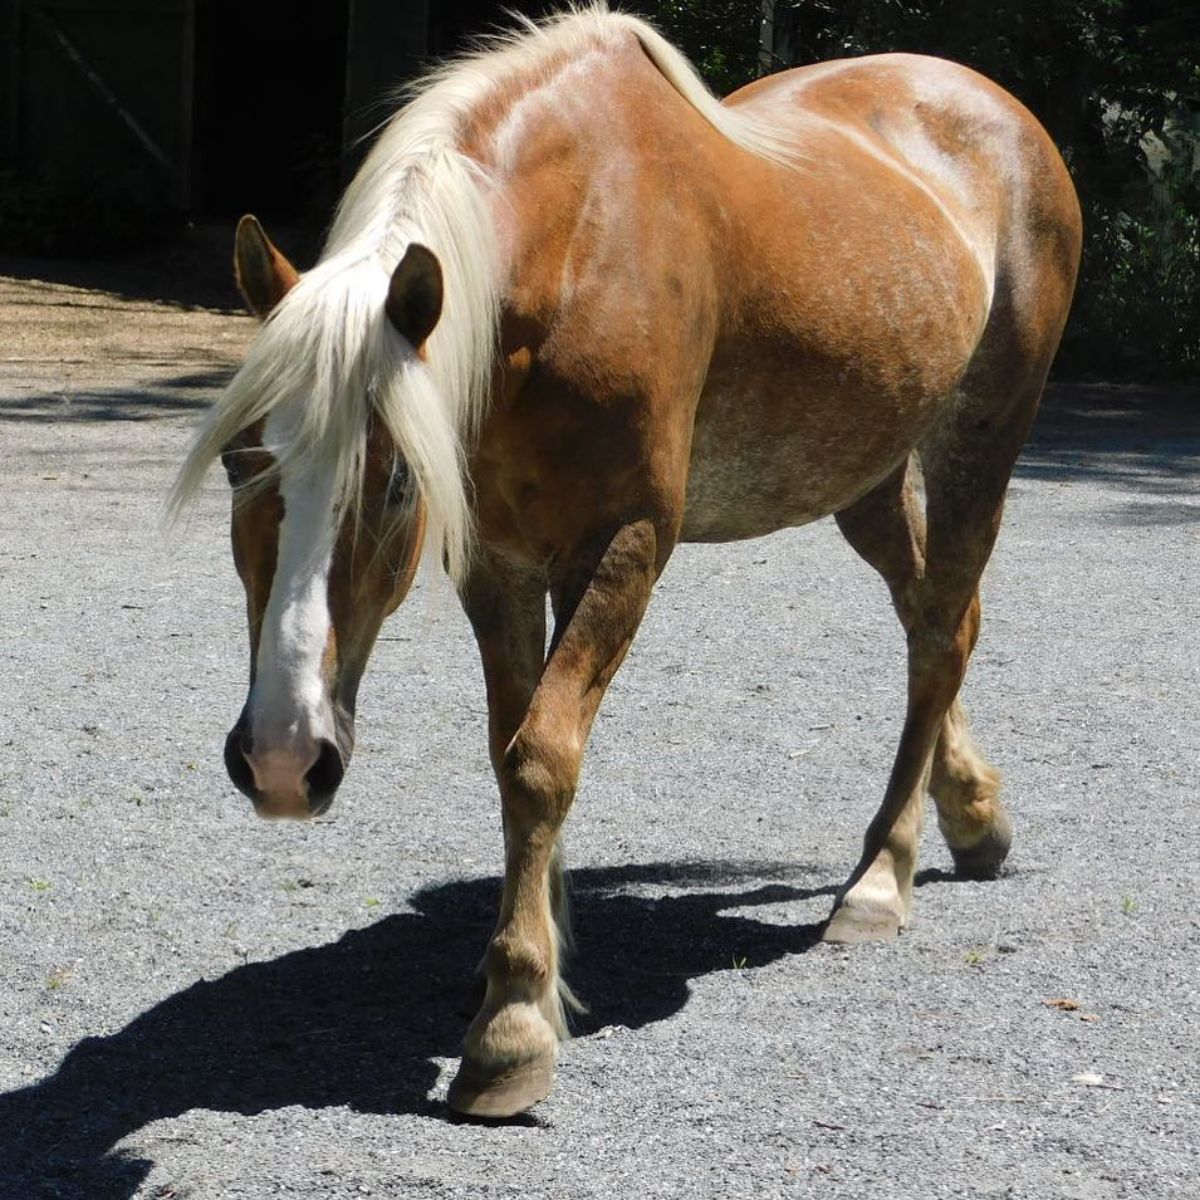 A chestnut horse with a white mane walks on a ranch.